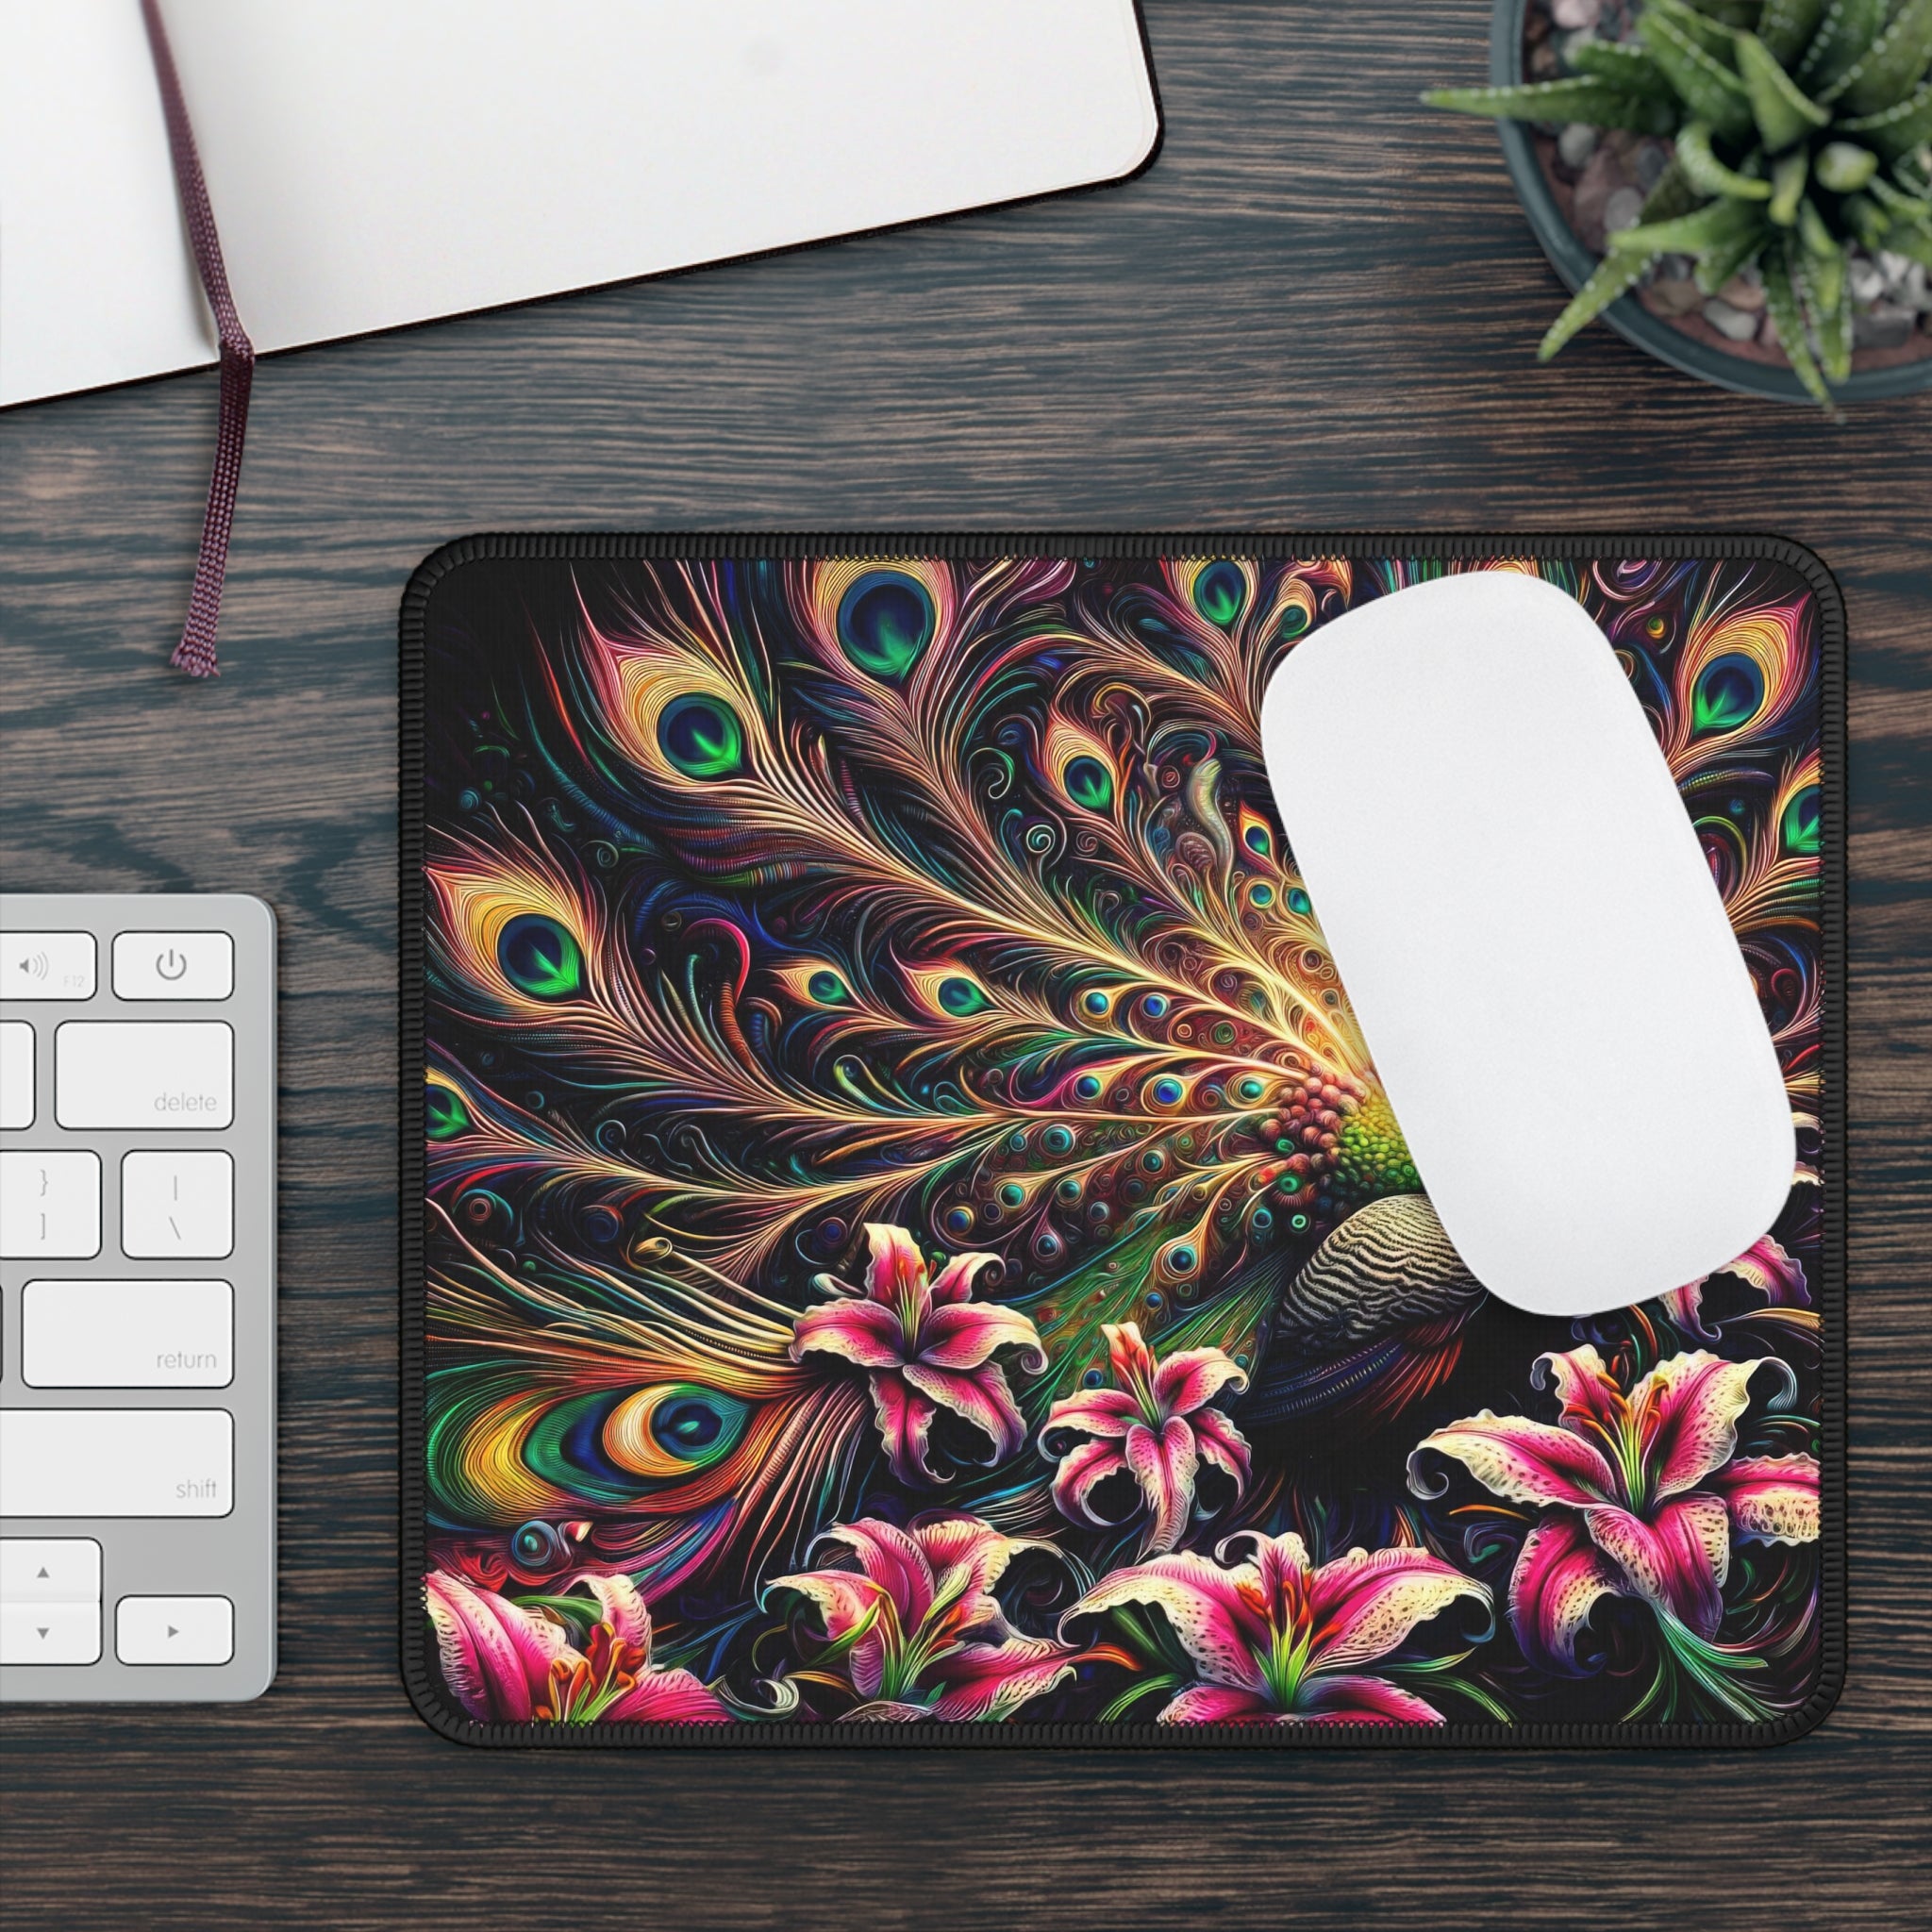 The Luminous Dance of the Peacock Gaming Mouse Pad